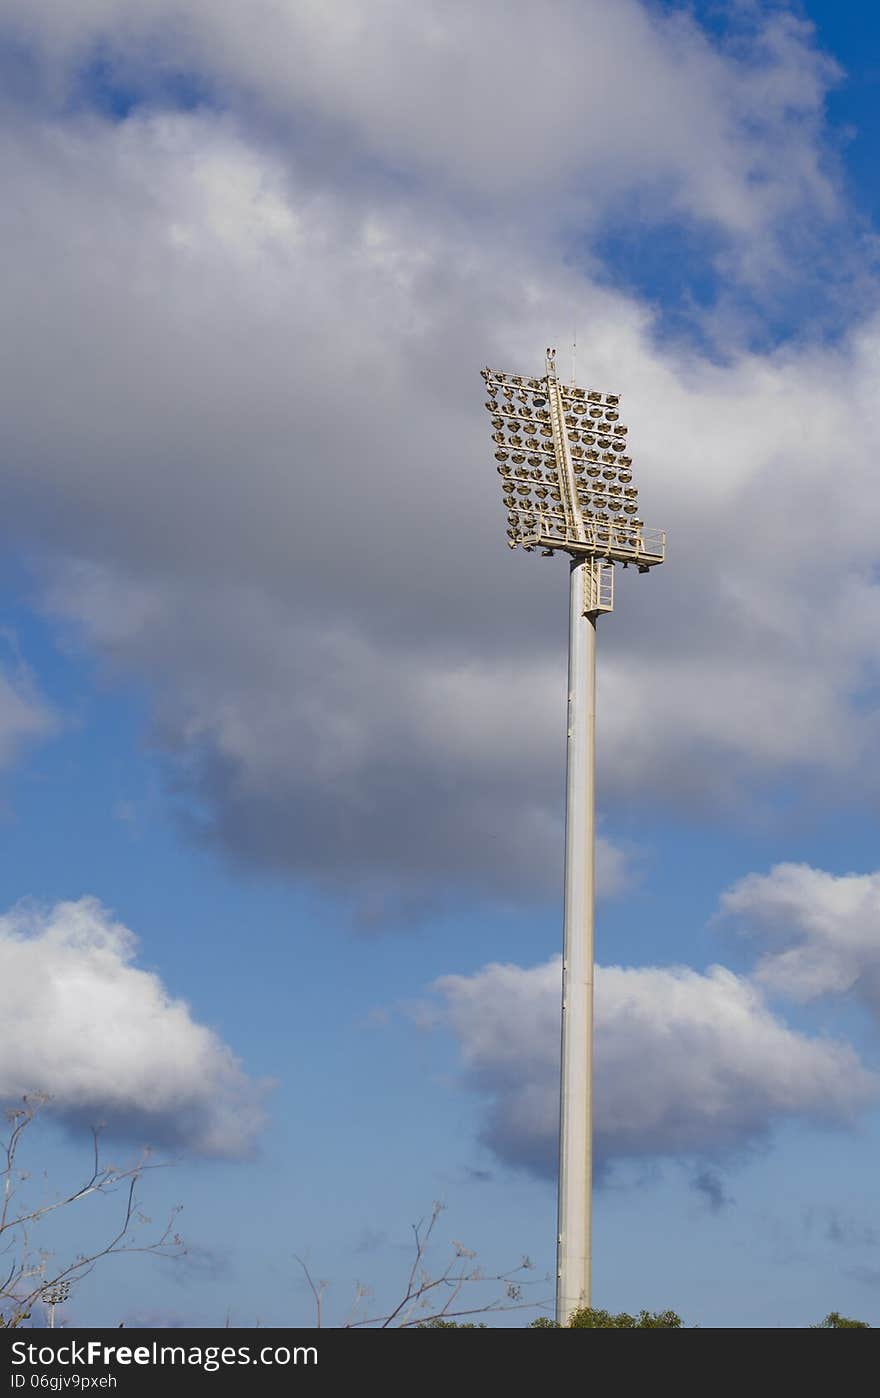 One of the flood lights at the Maltese national soccer stadium. One of the flood lights at the Maltese national soccer stadium